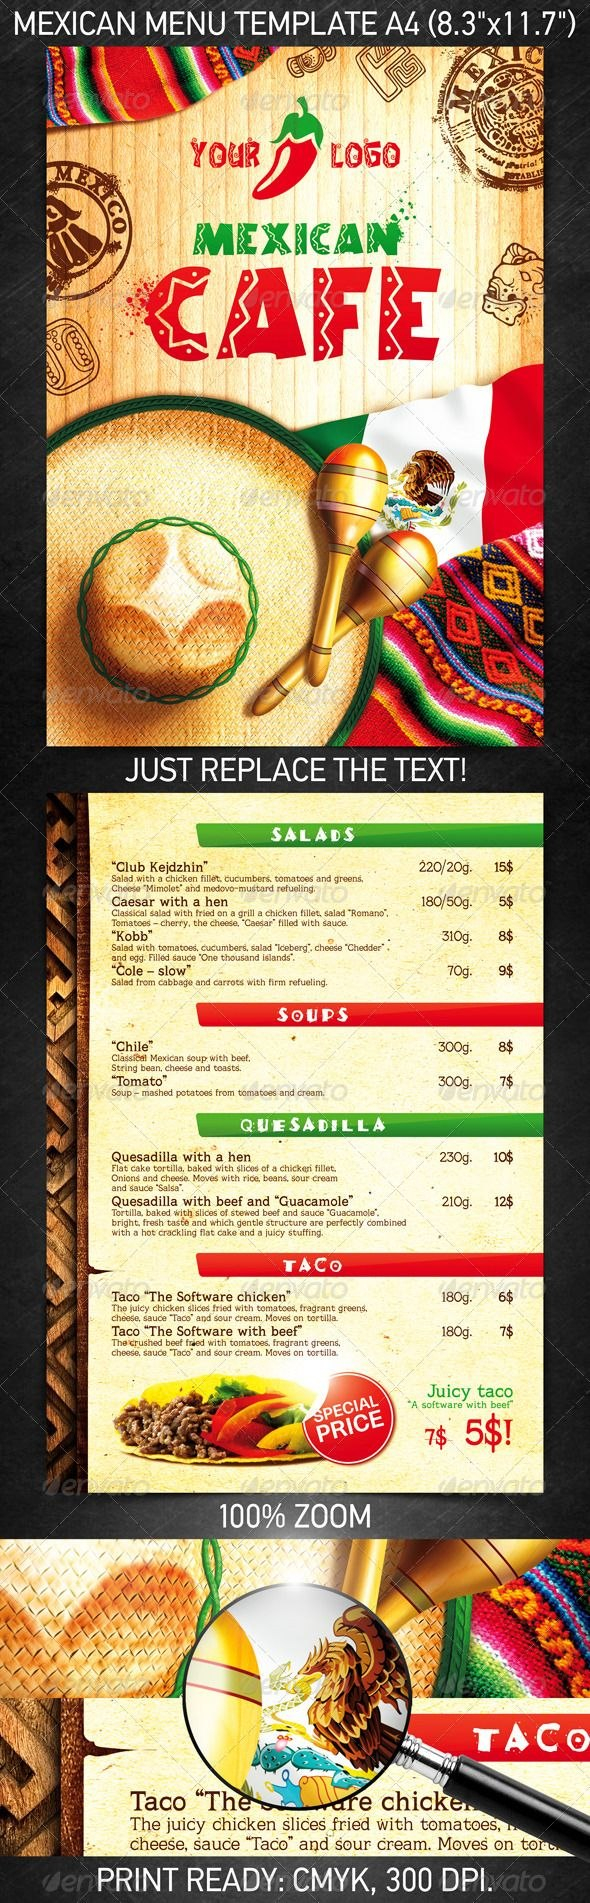 Pinterest intended for Mexican Menu Template Free Download